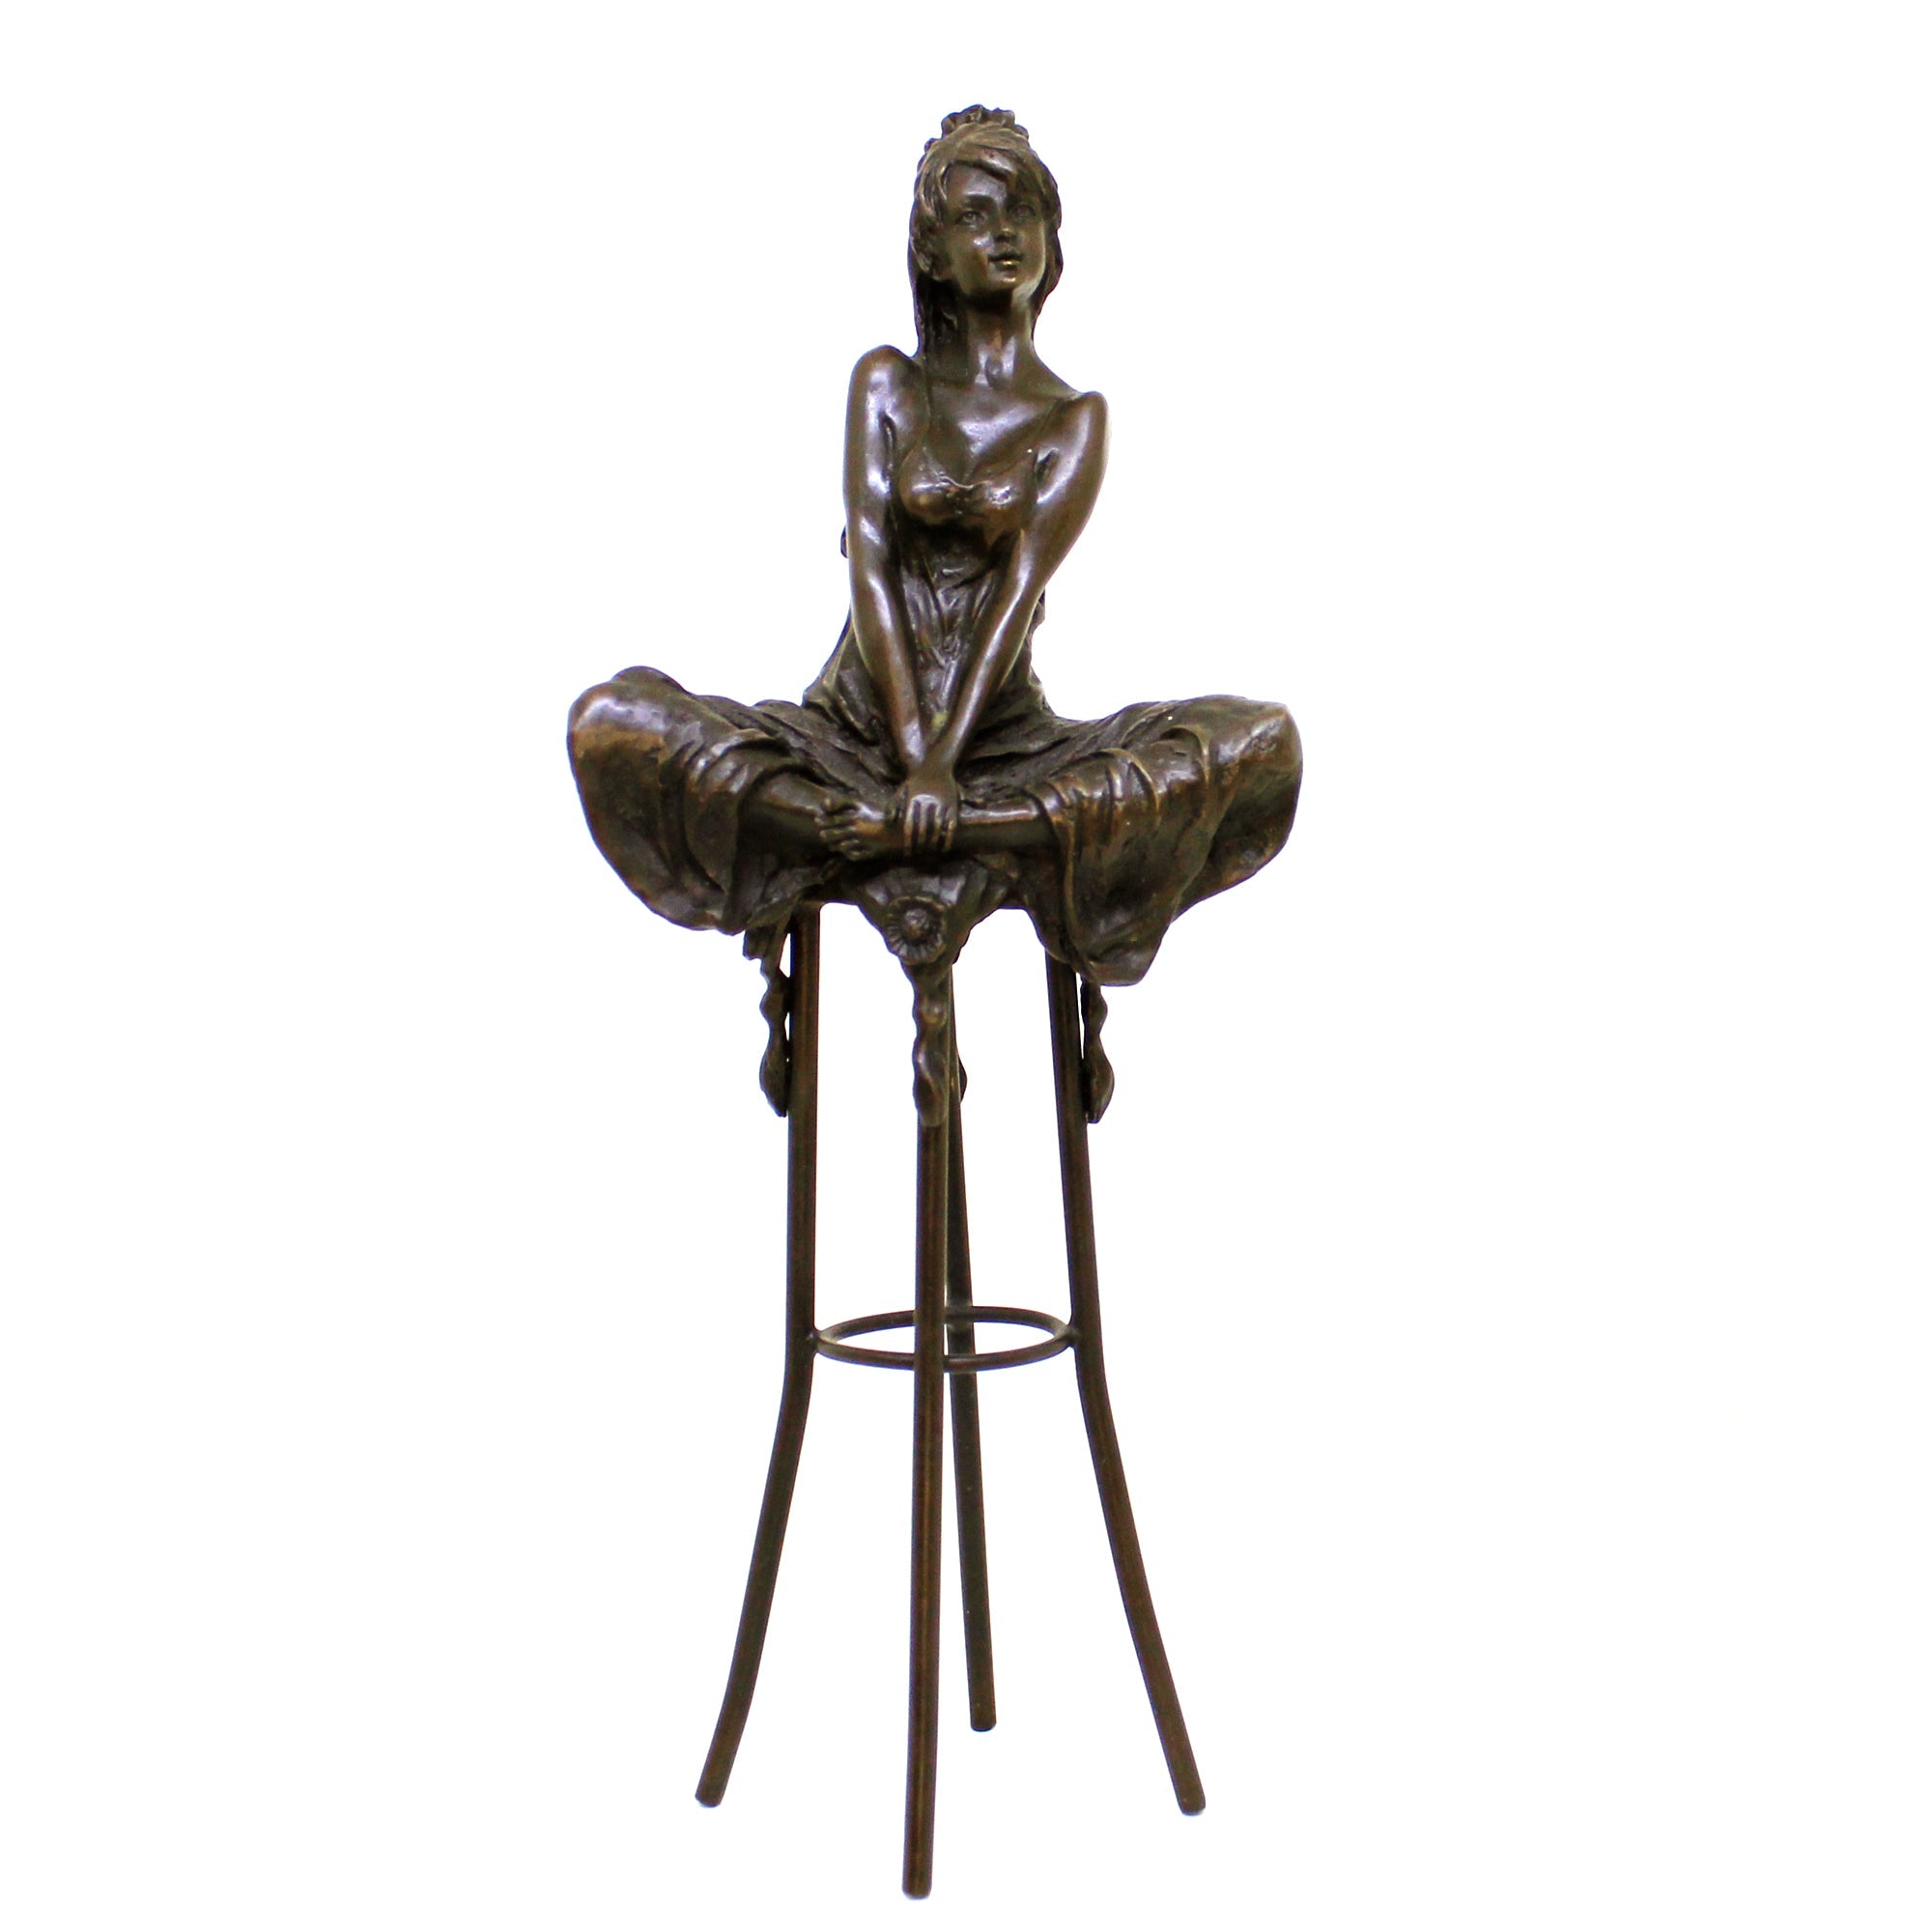 Woman on a Chair